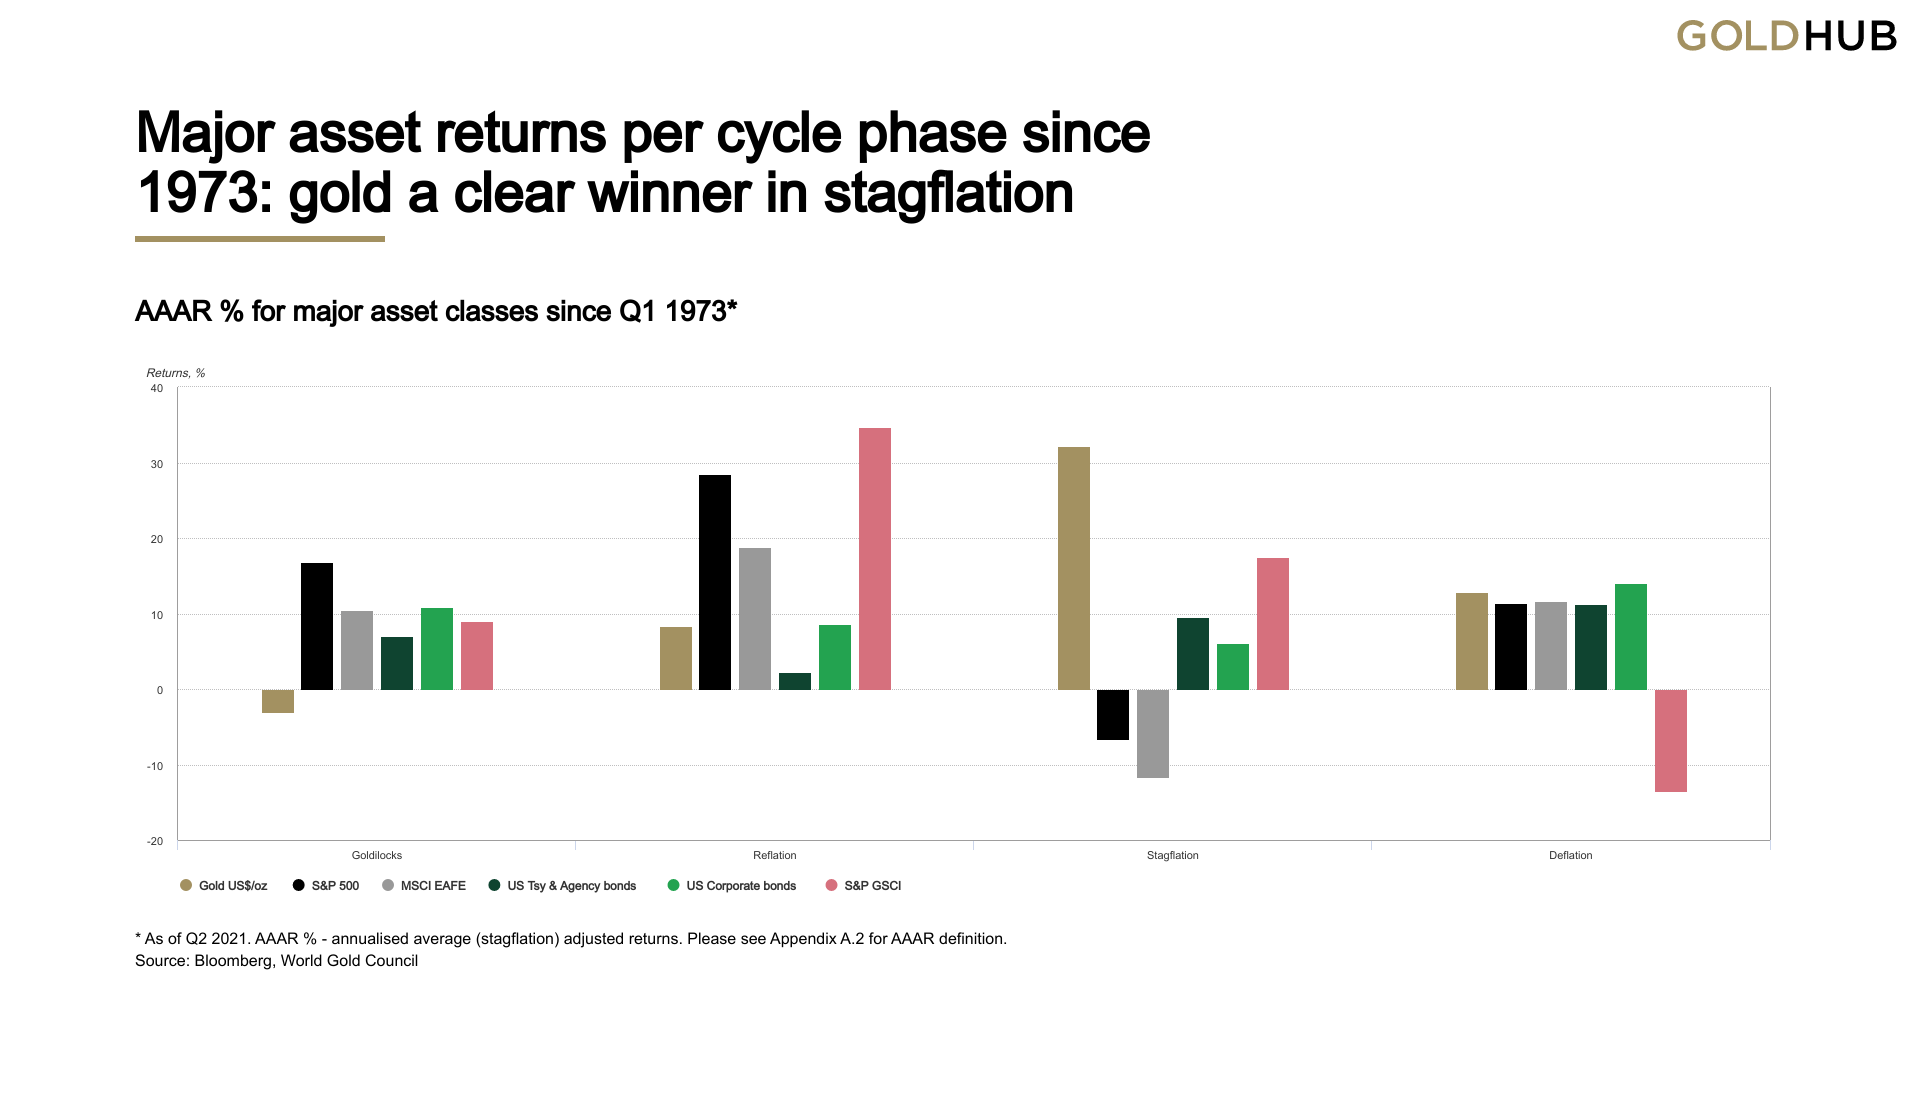 Gold and other asset classes during different economic cycles